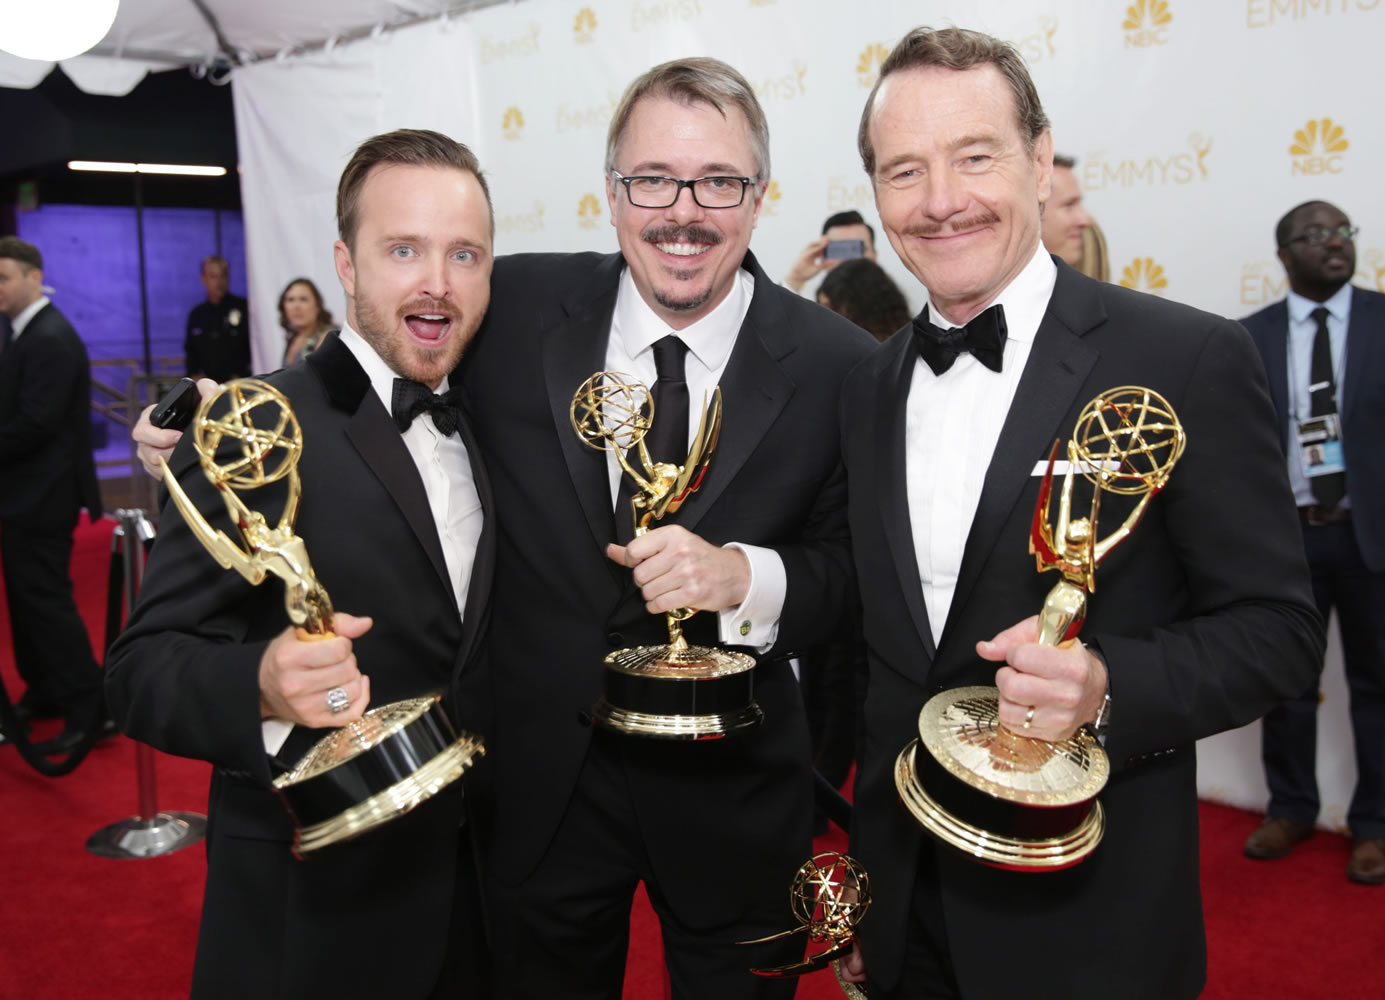 Casey Curry/Invision for the Television Academy
Aaron Paul, left, Vince Gilligan and Bryan Cranston pose Monday at the 66th Primetime Emmy Awards at the Nokia Theatre L.A. Live in Los Angeles.